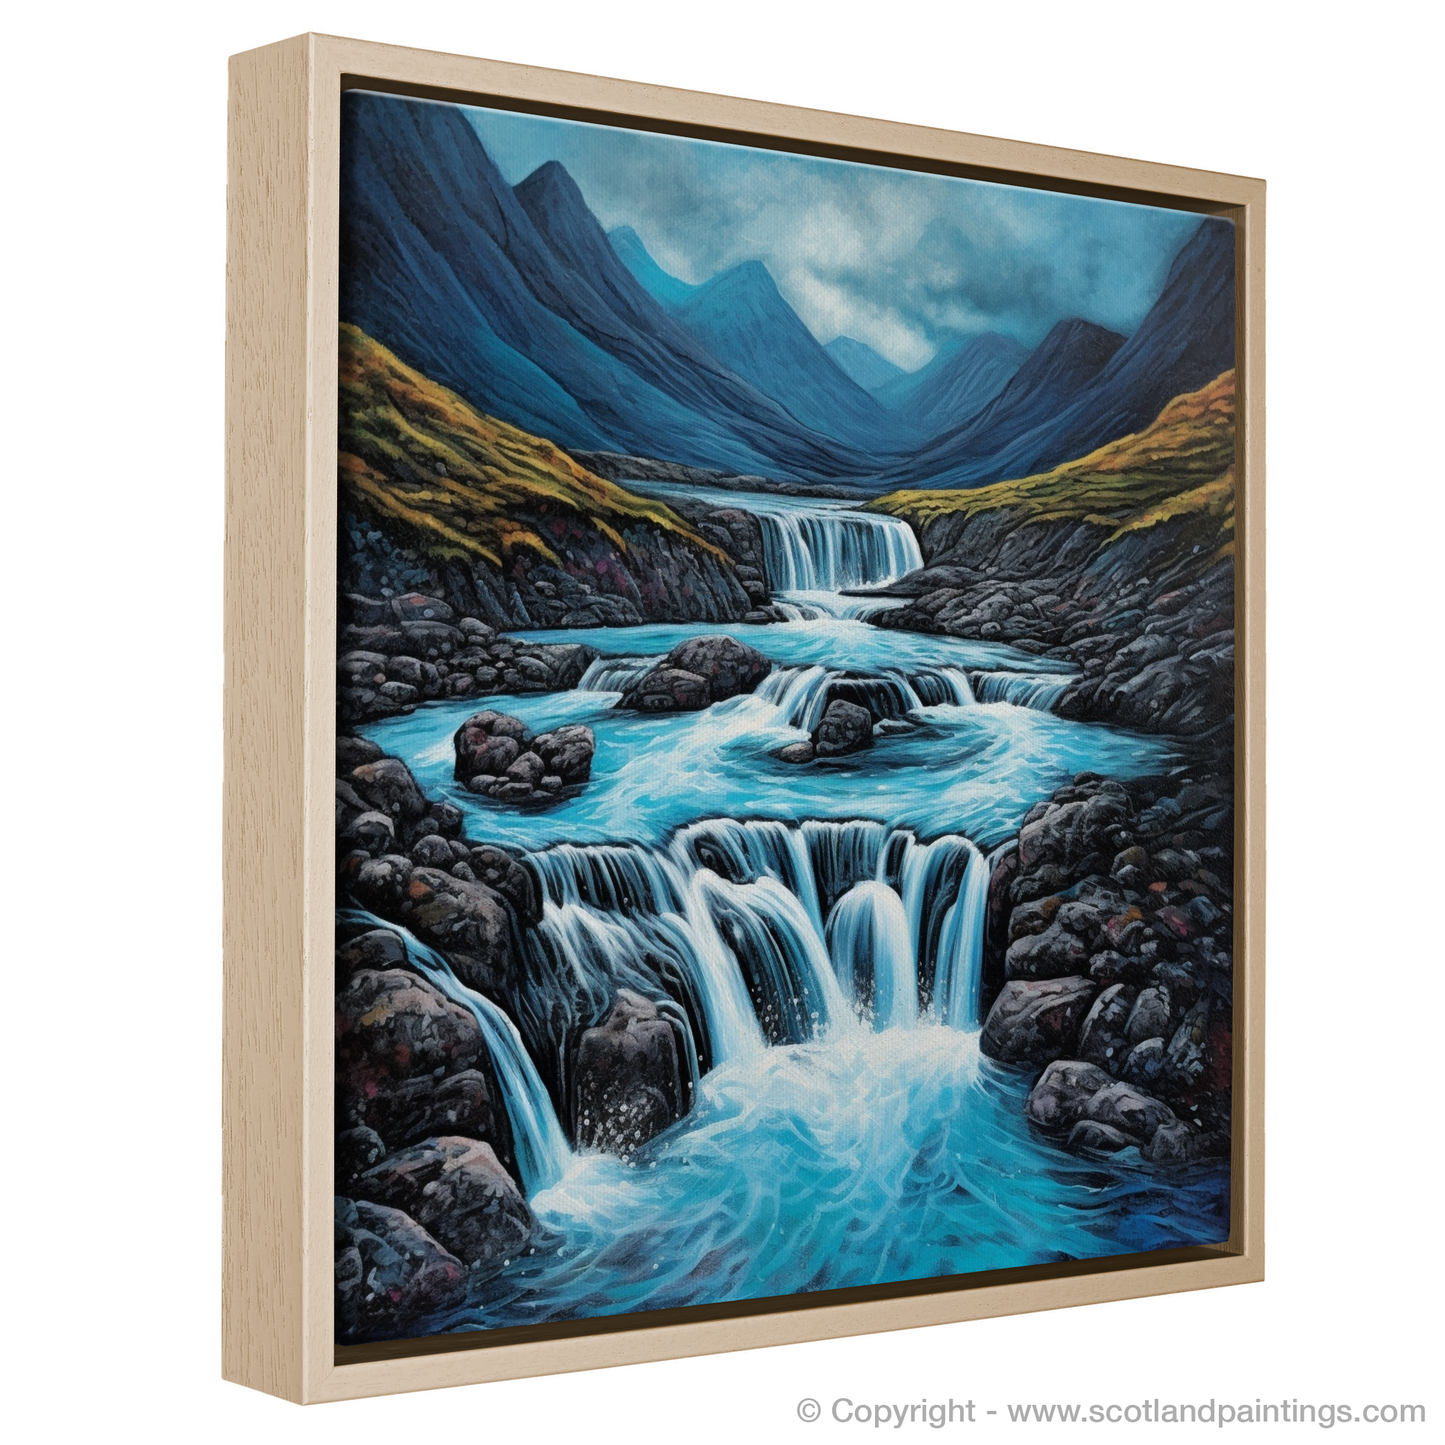 Enchanted Waters and Brooding Skies: A Naive Art Tribute to Isle of Skye Fairy Pools